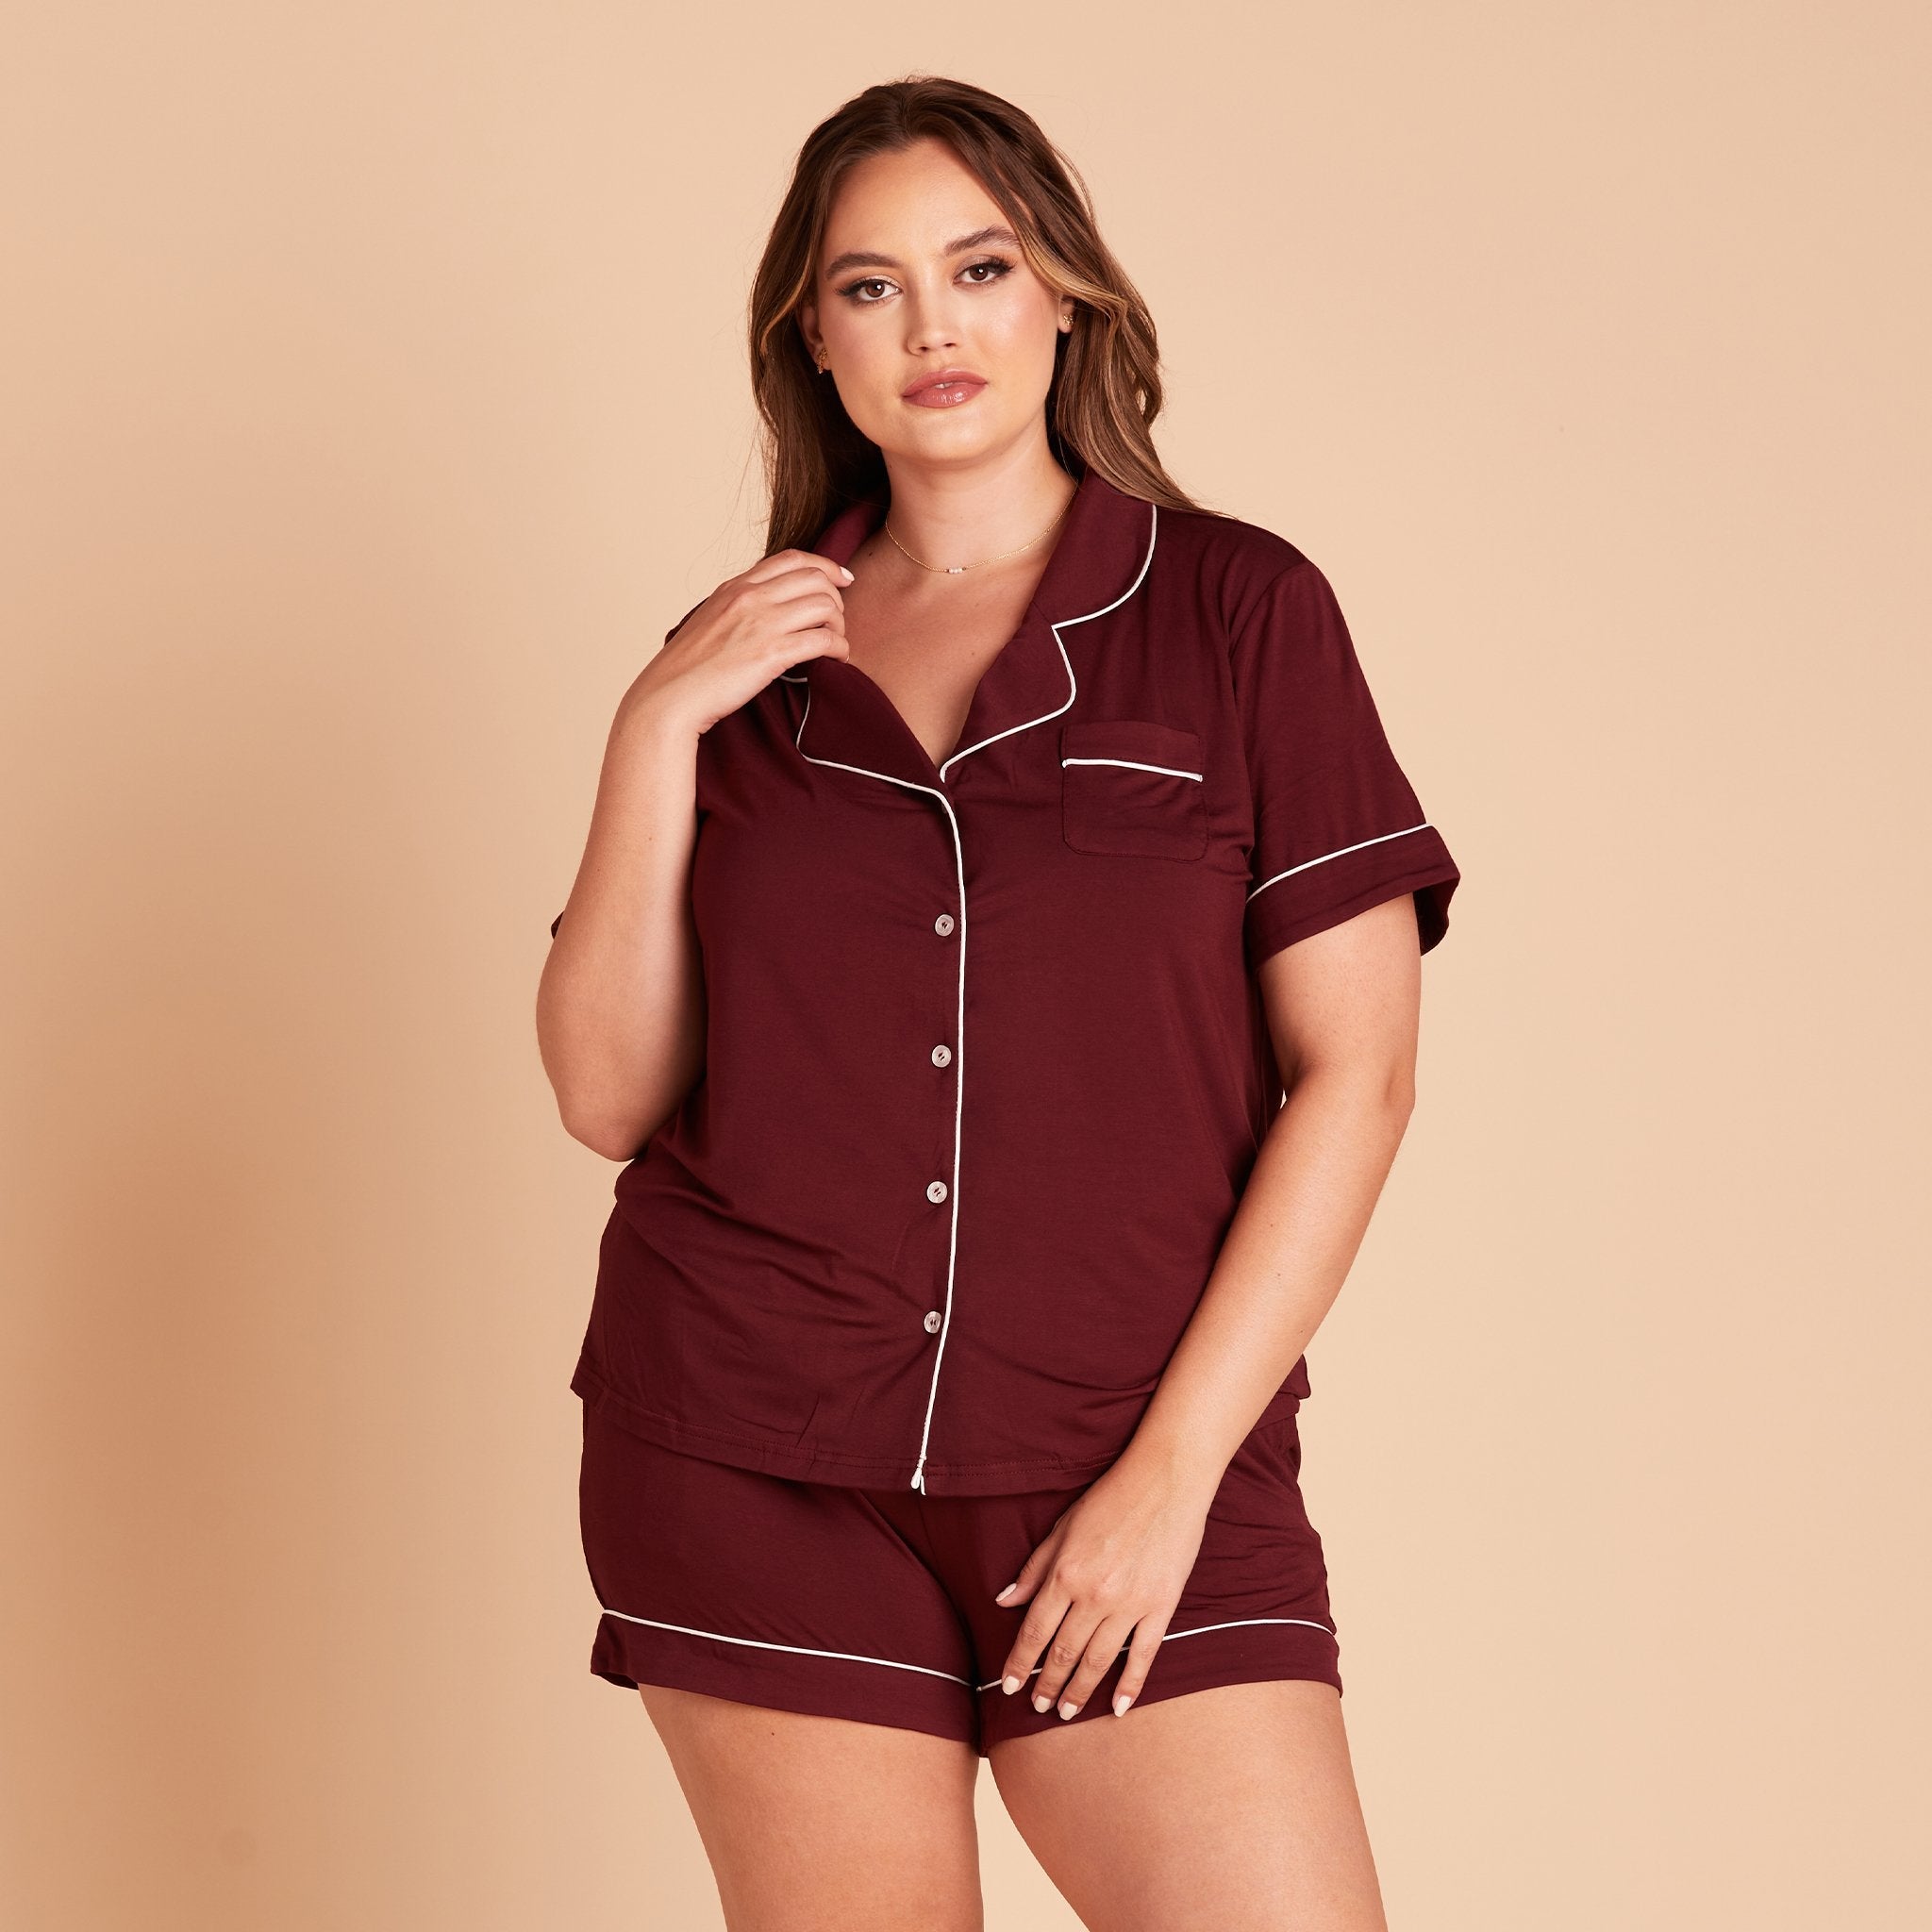 Jonny Plus Size Short Sleeve Pajama Set With White Piping in cabernet burgundy, front view